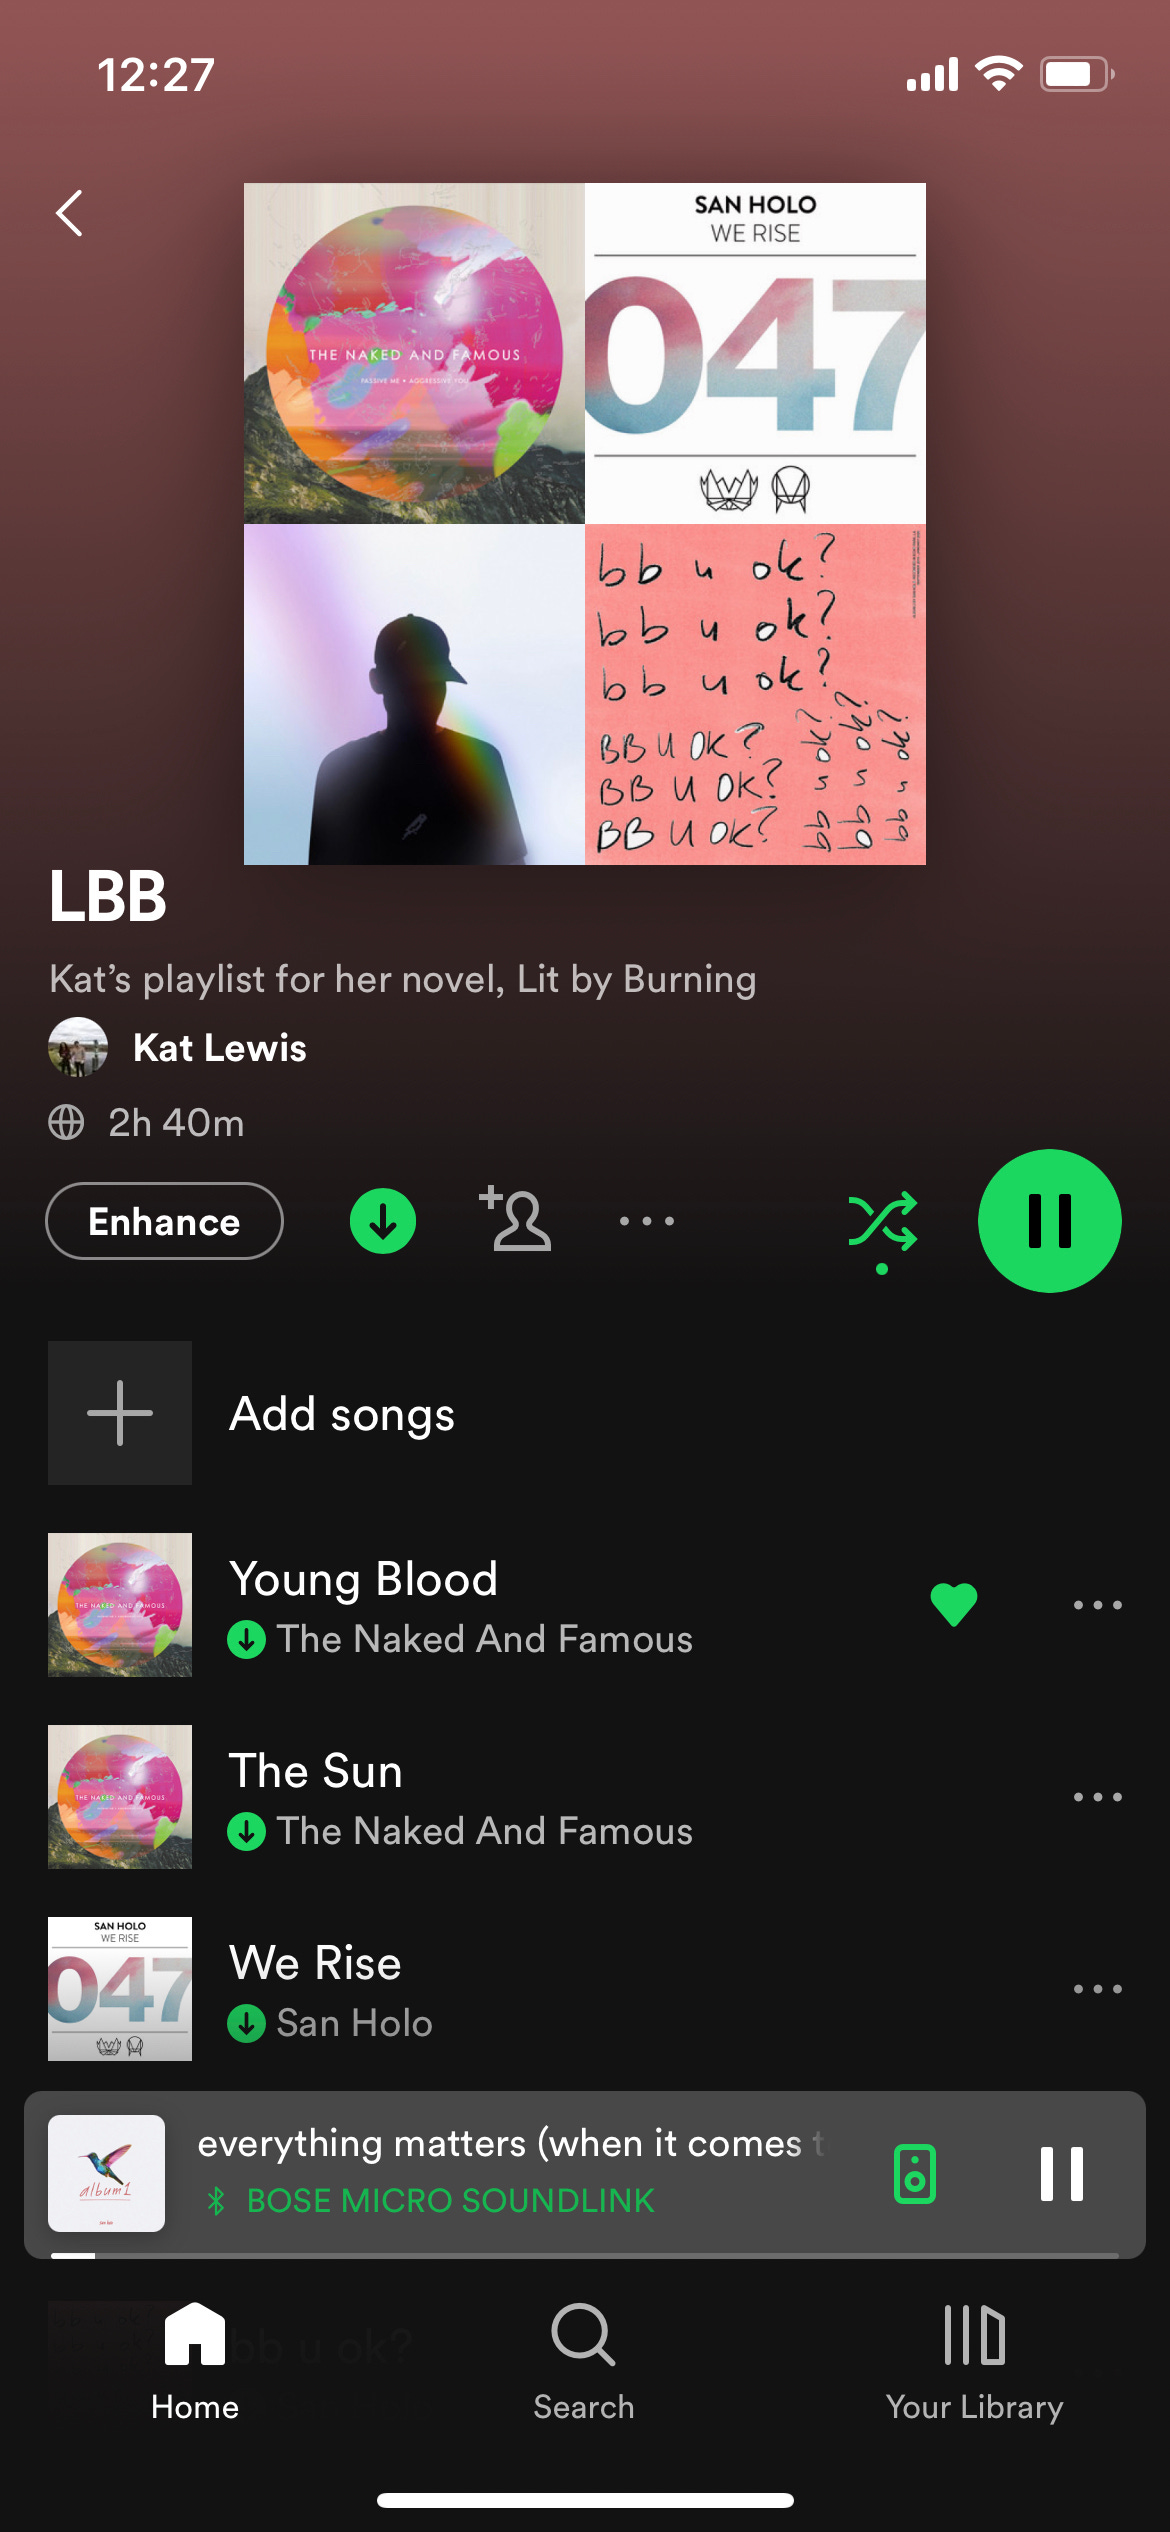 A screenshot of Kat’s spotify playlist for Lit by Burning. The album art for Passive Me, Aggressive You by the Naked and Famous, We Rise, Light, and bb u ok by San Holo is on display. The first three songs of the playlist are Young Blood by The Naked and Famous, The Sun by The Naked and Famous, and We Rise by Han Solo.